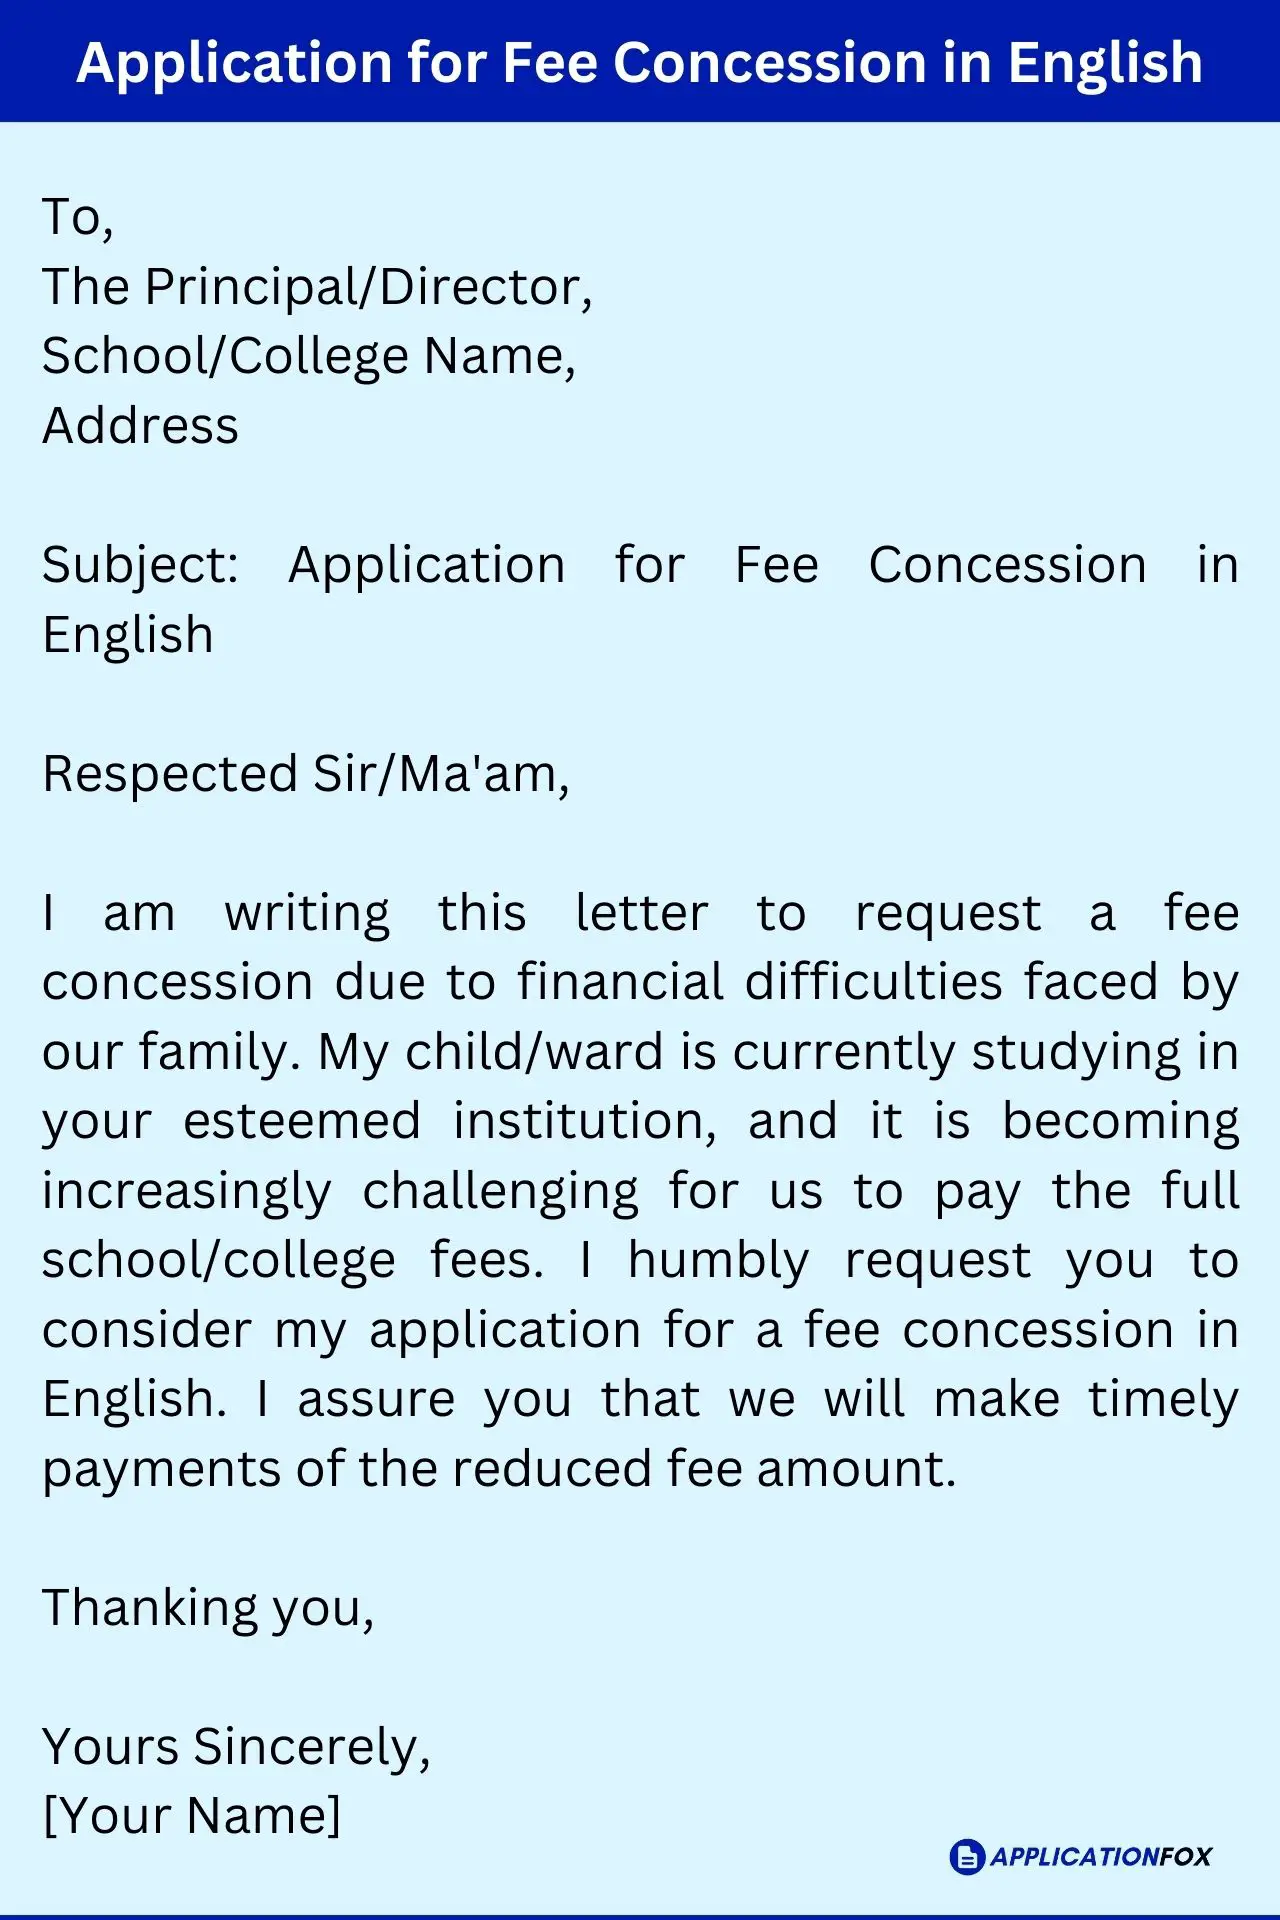 Application for Fee Concession in English